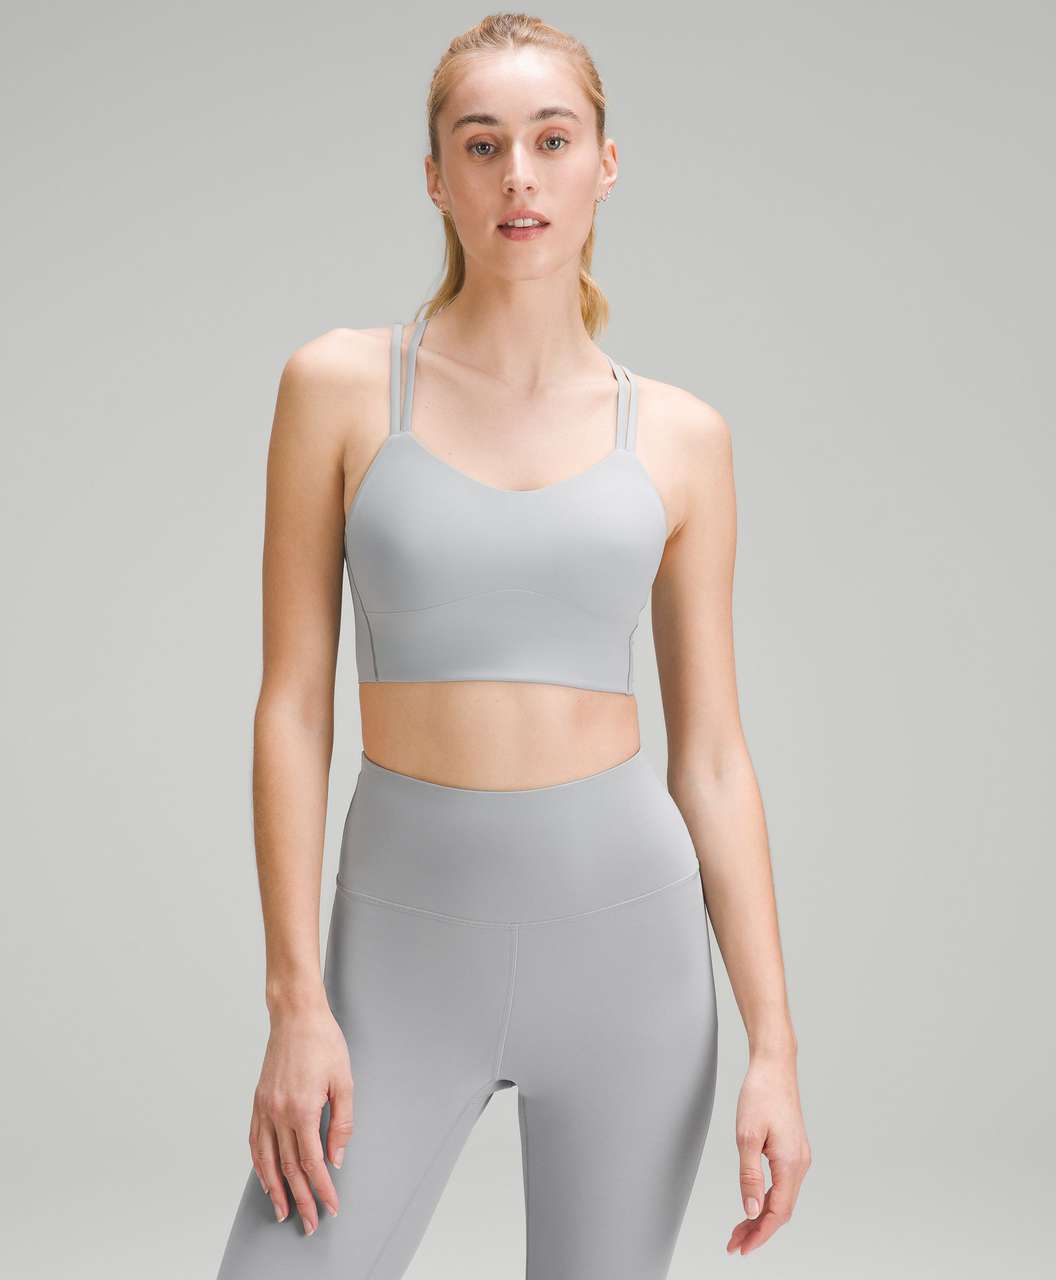 What bra do you recommend me using for this top? : r/lululemon